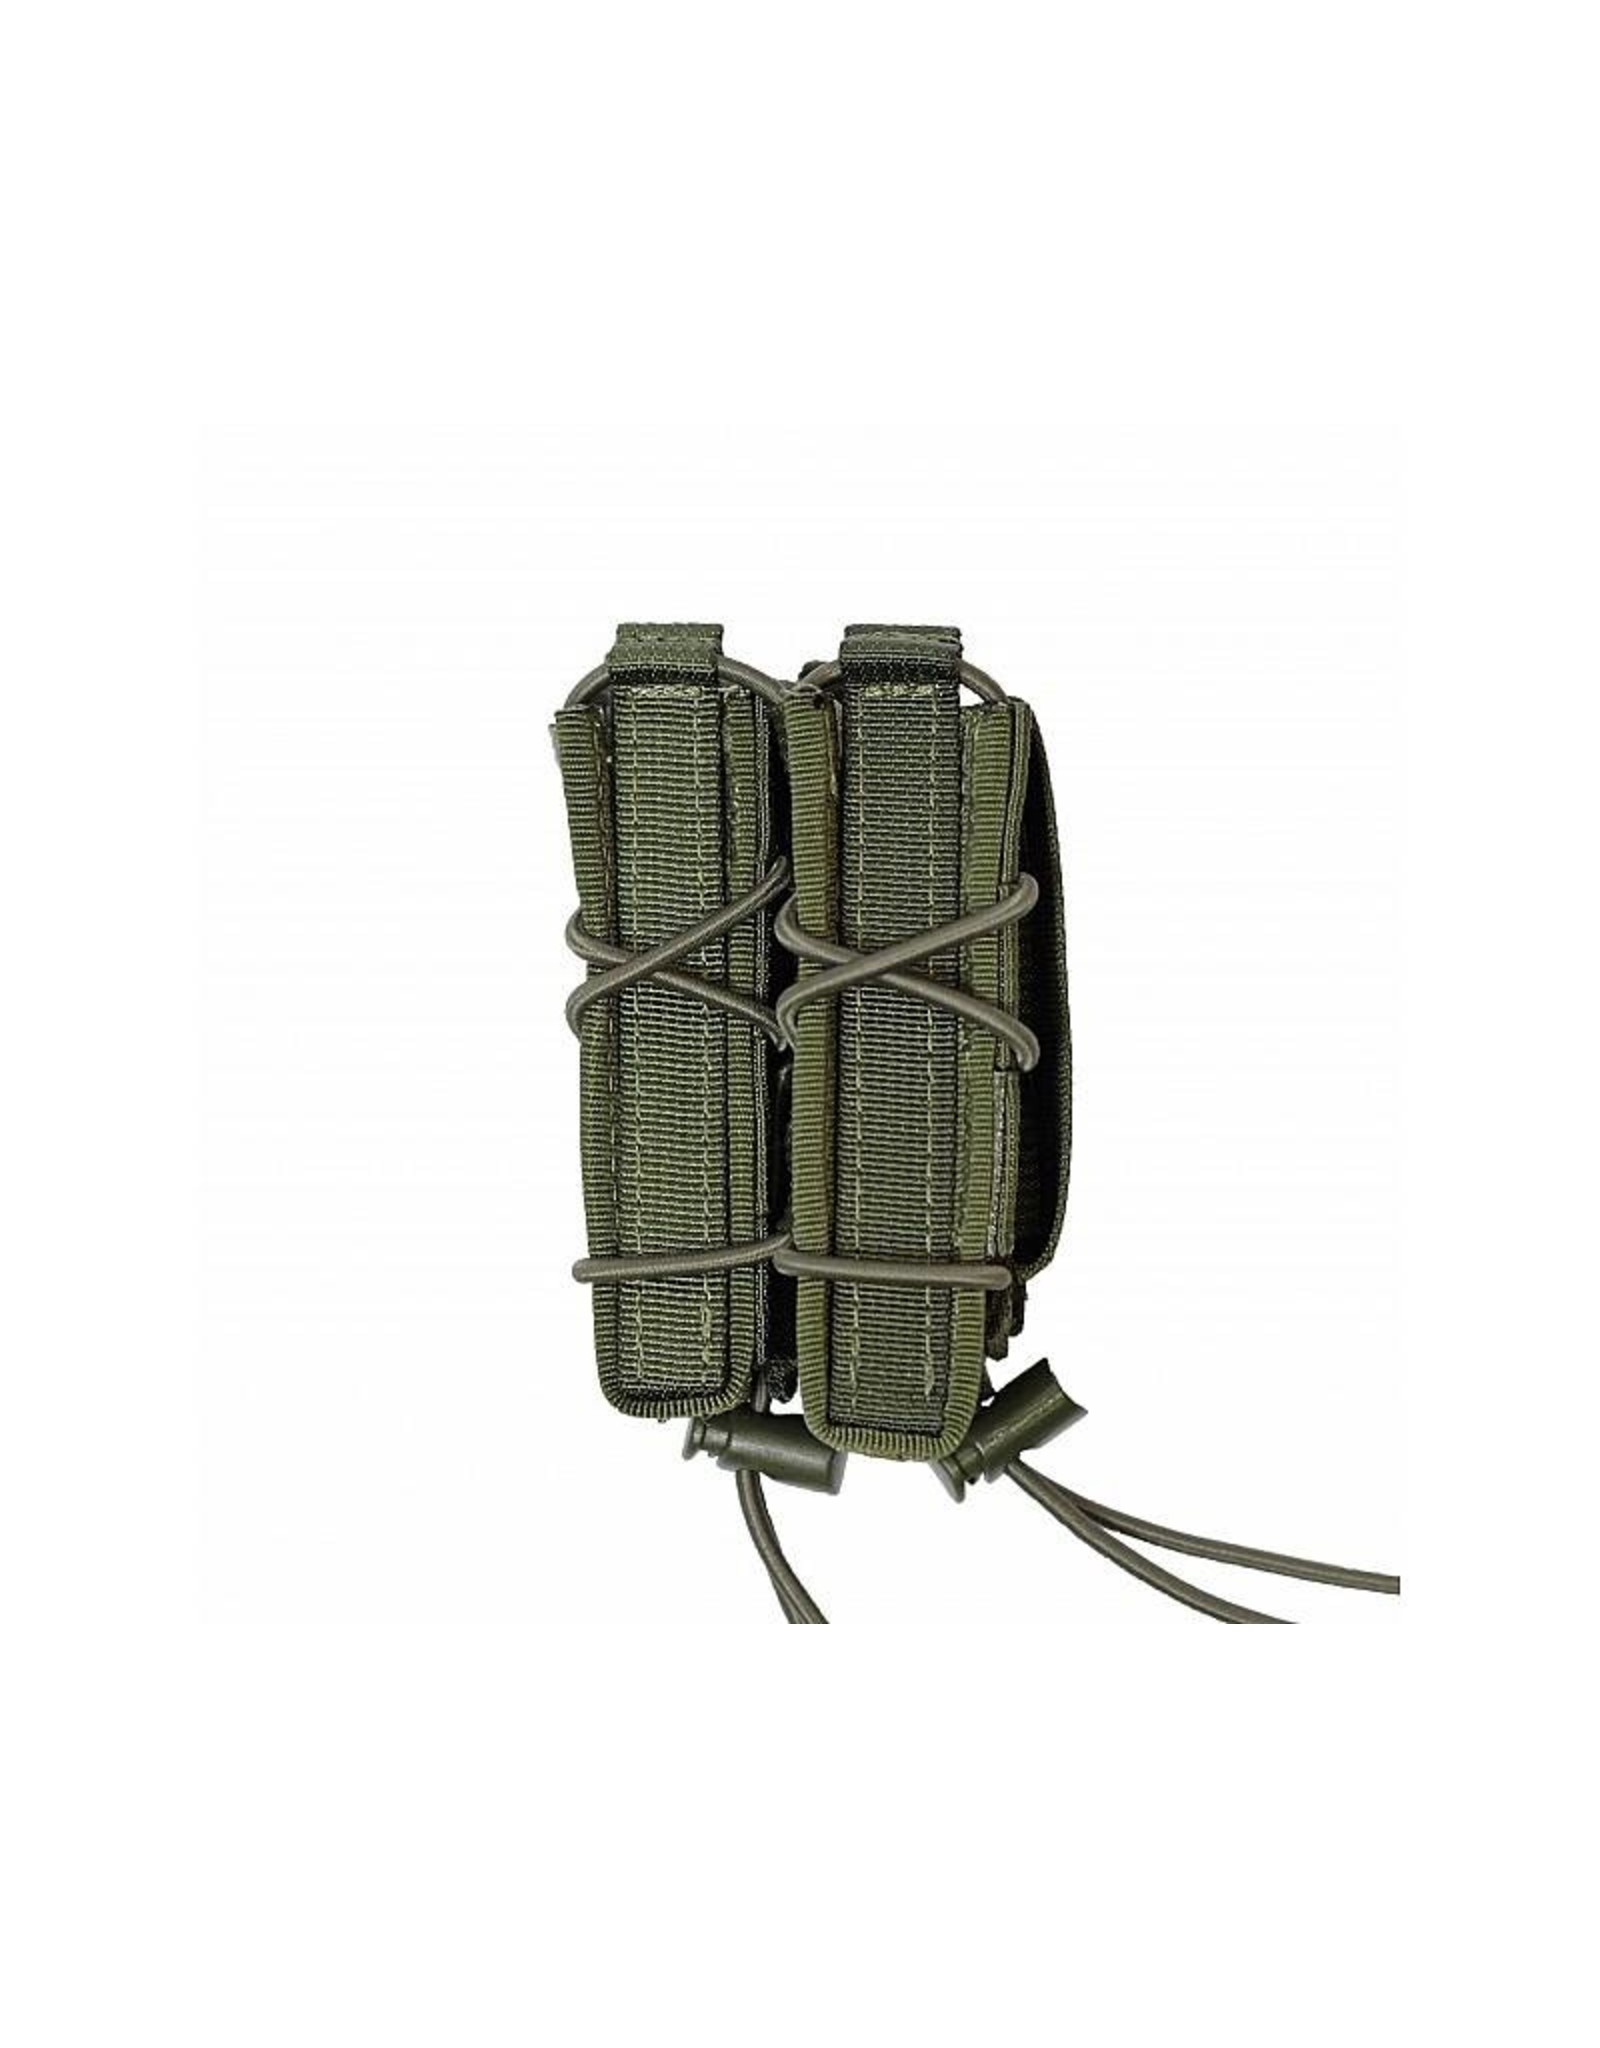 Warrior Single Quick Mag with Single Pistol Pouch -Olive Drab